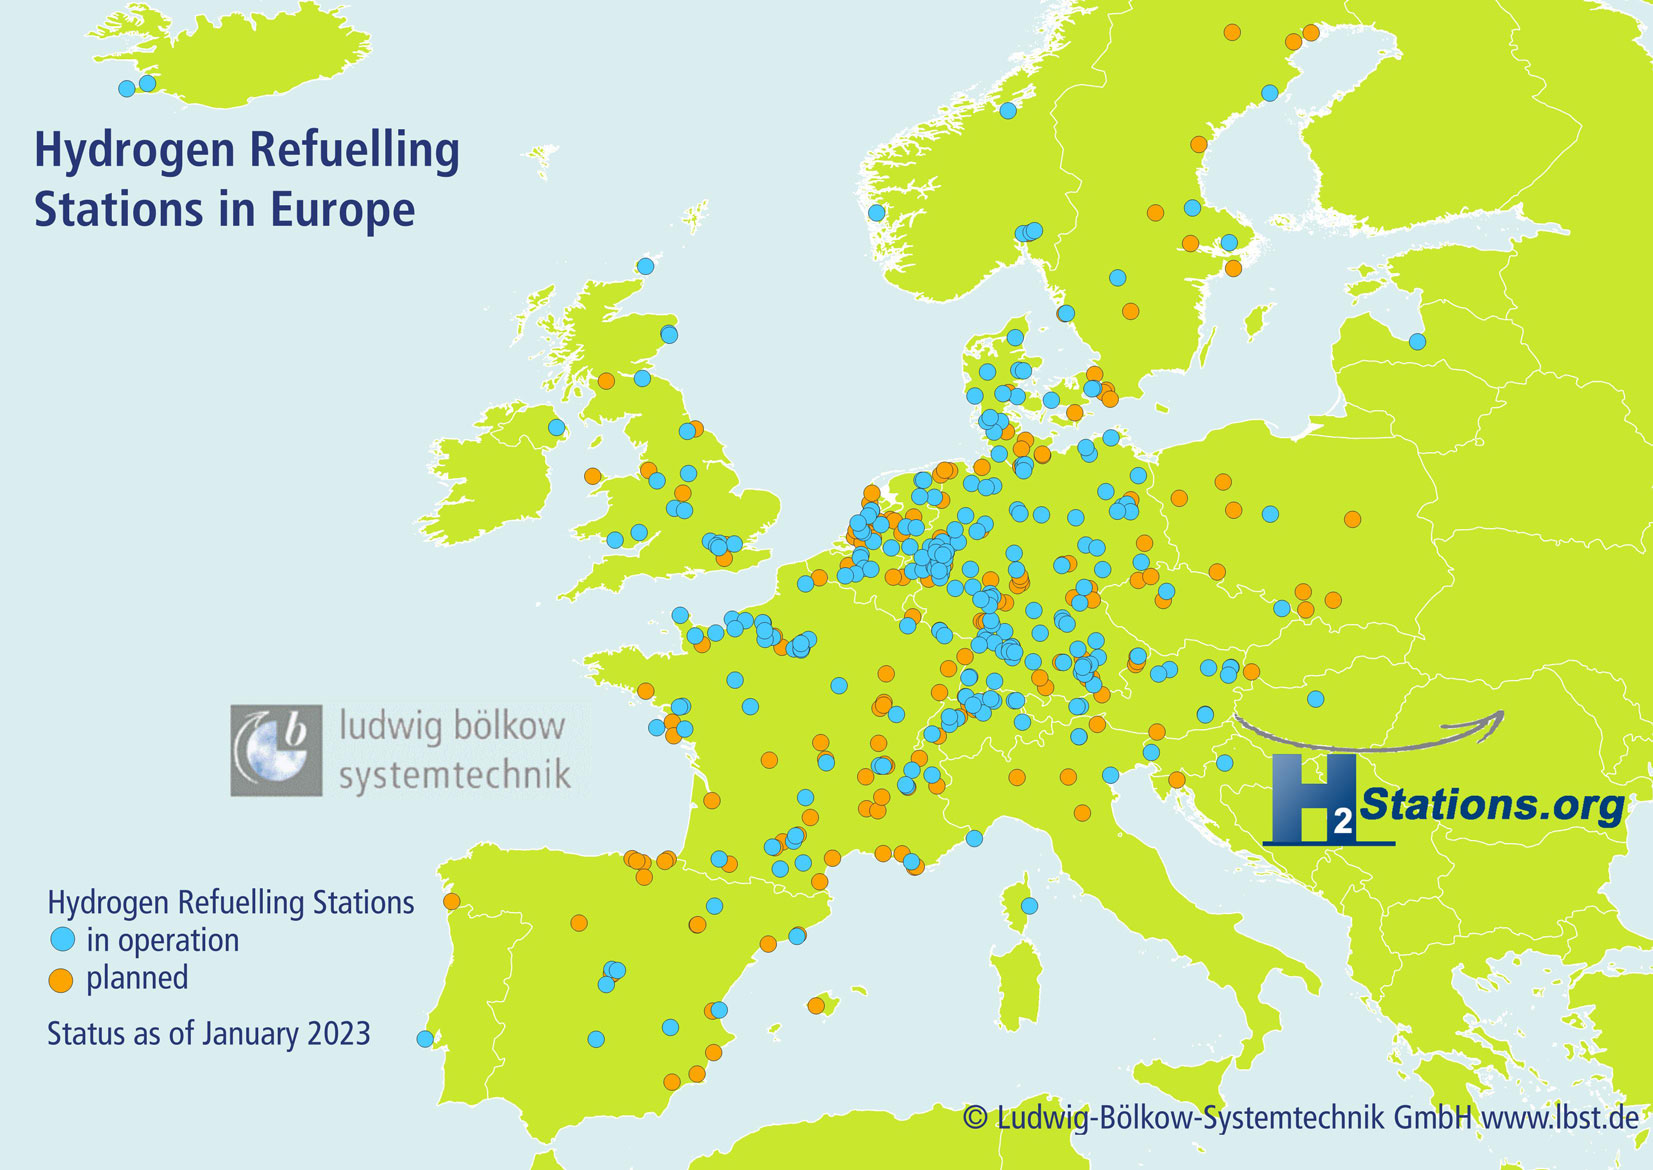 Press Release 2023: Another record addition of European hydrogen refuelling stations in 2022 - H2Stations.org